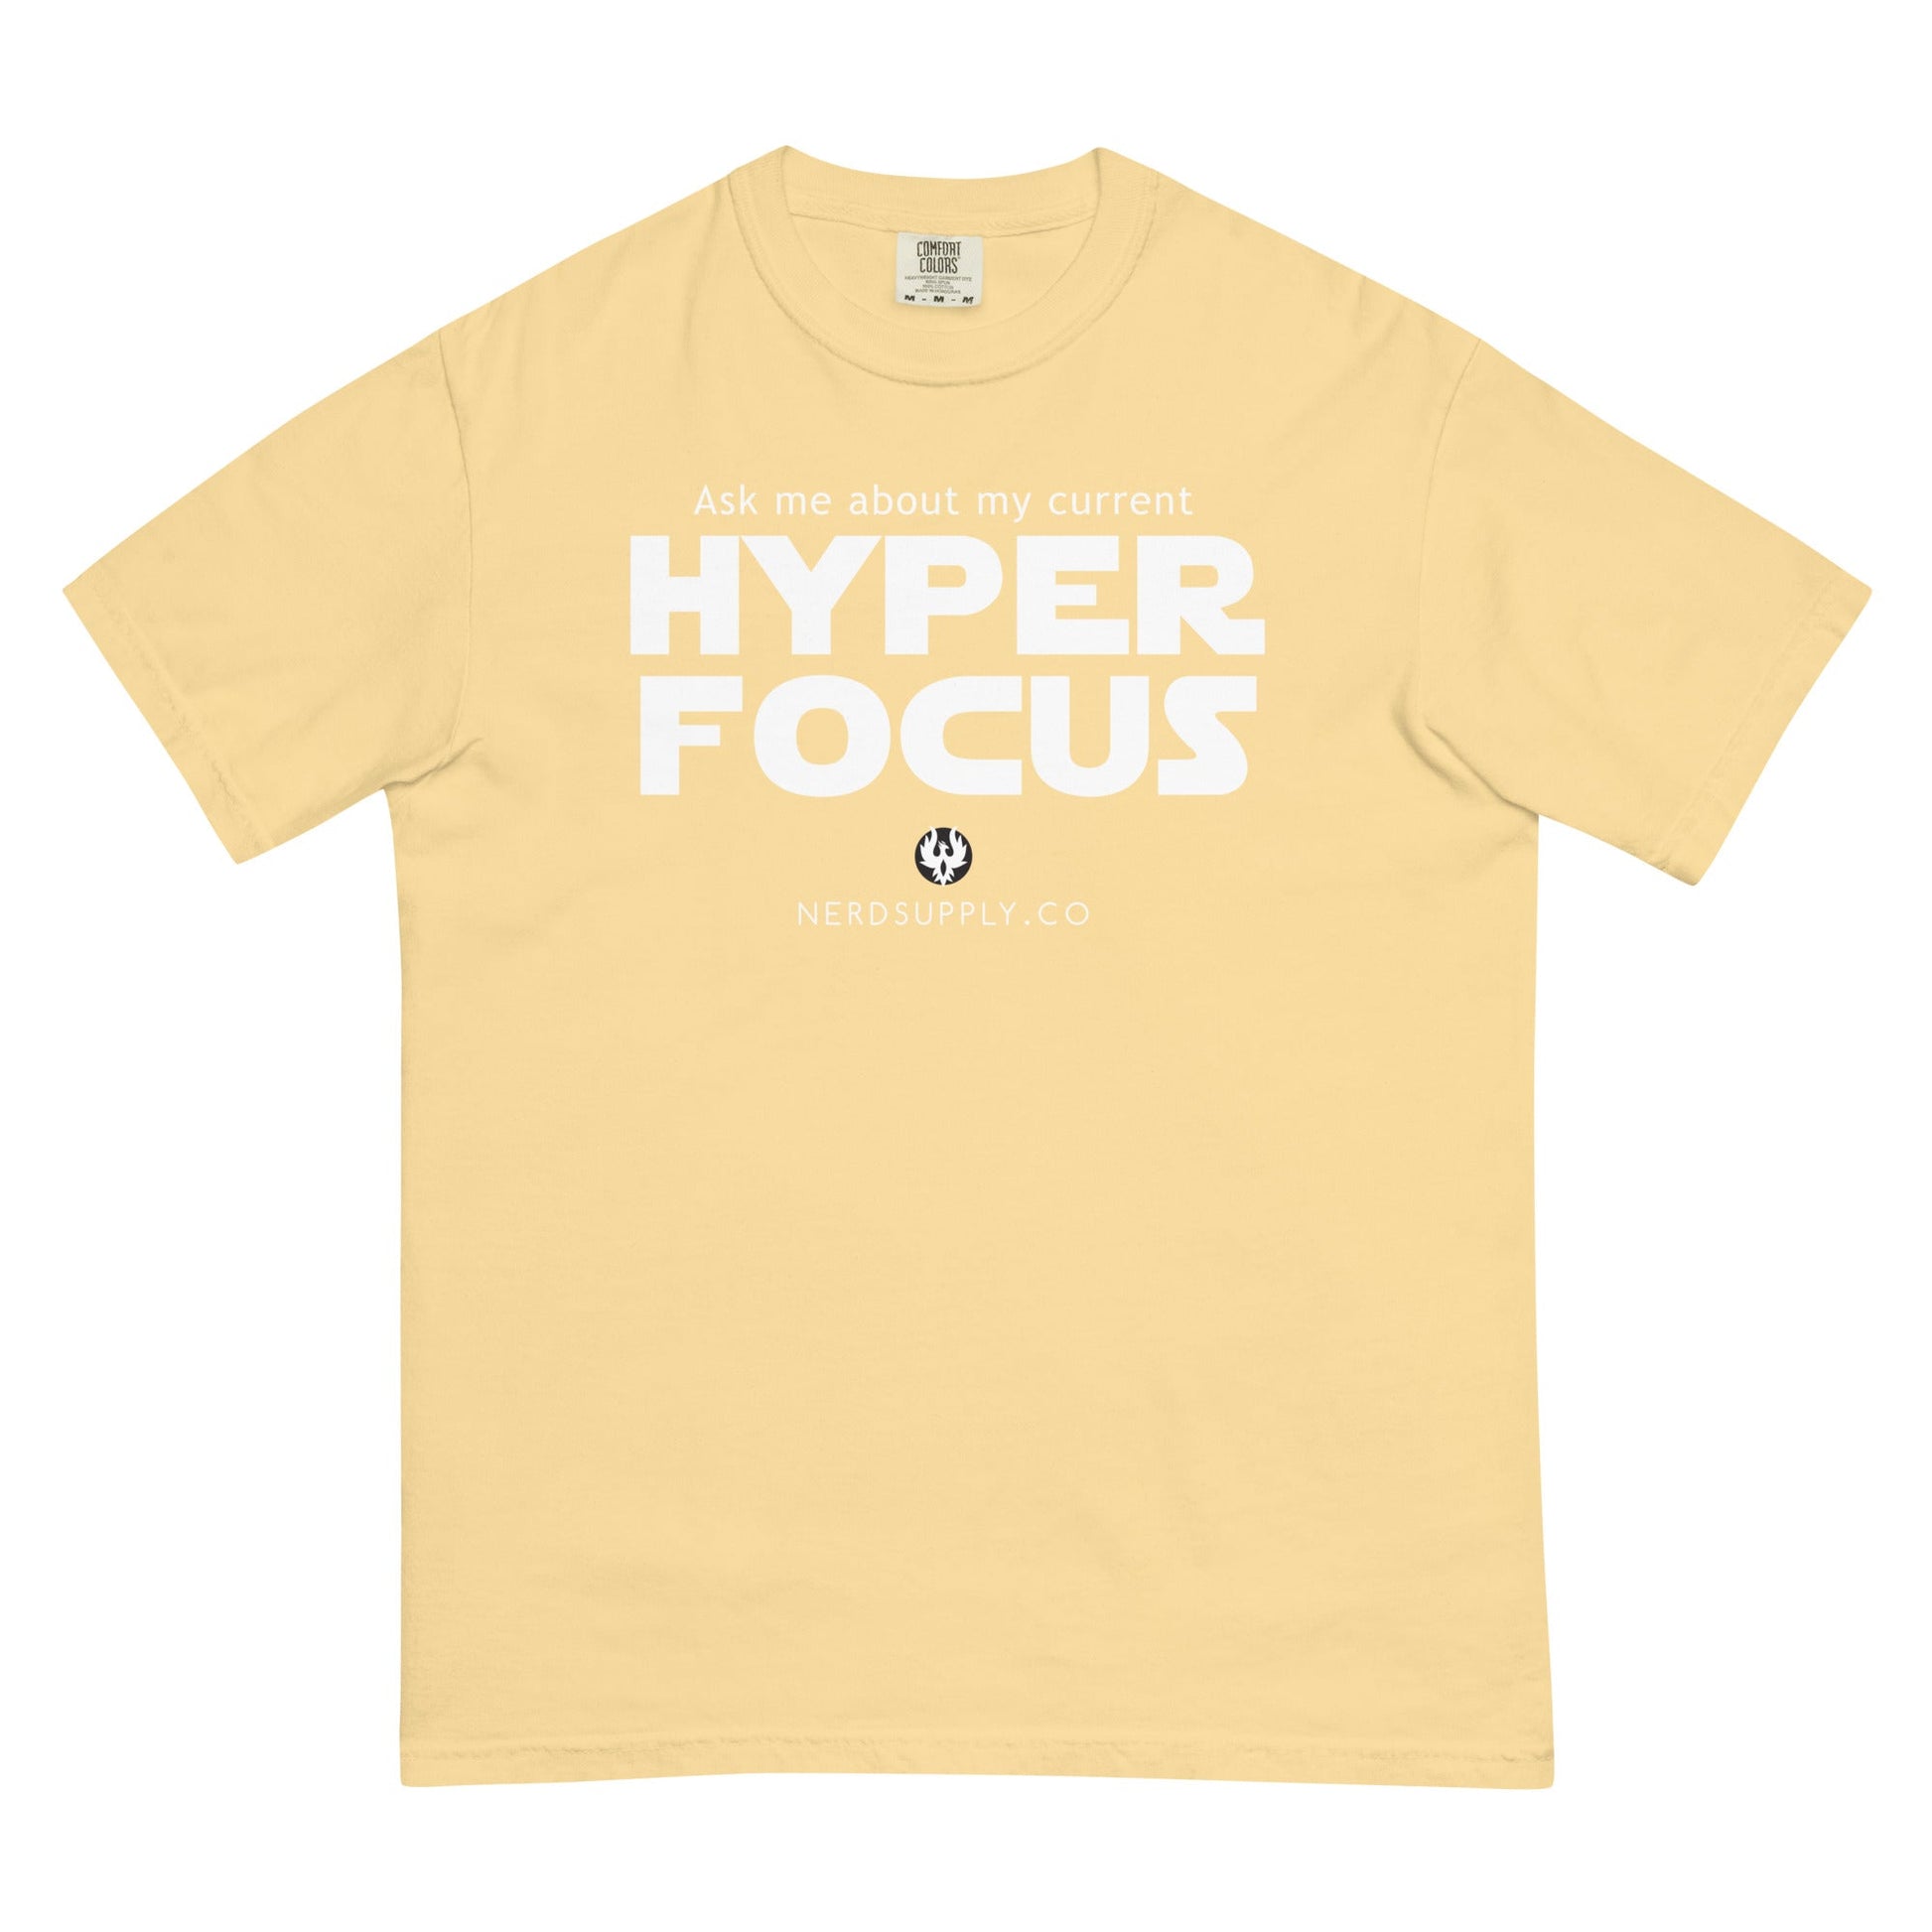 "Ask me about my current Hyper Focus" Star Font Tee - The Nerd Supply Company